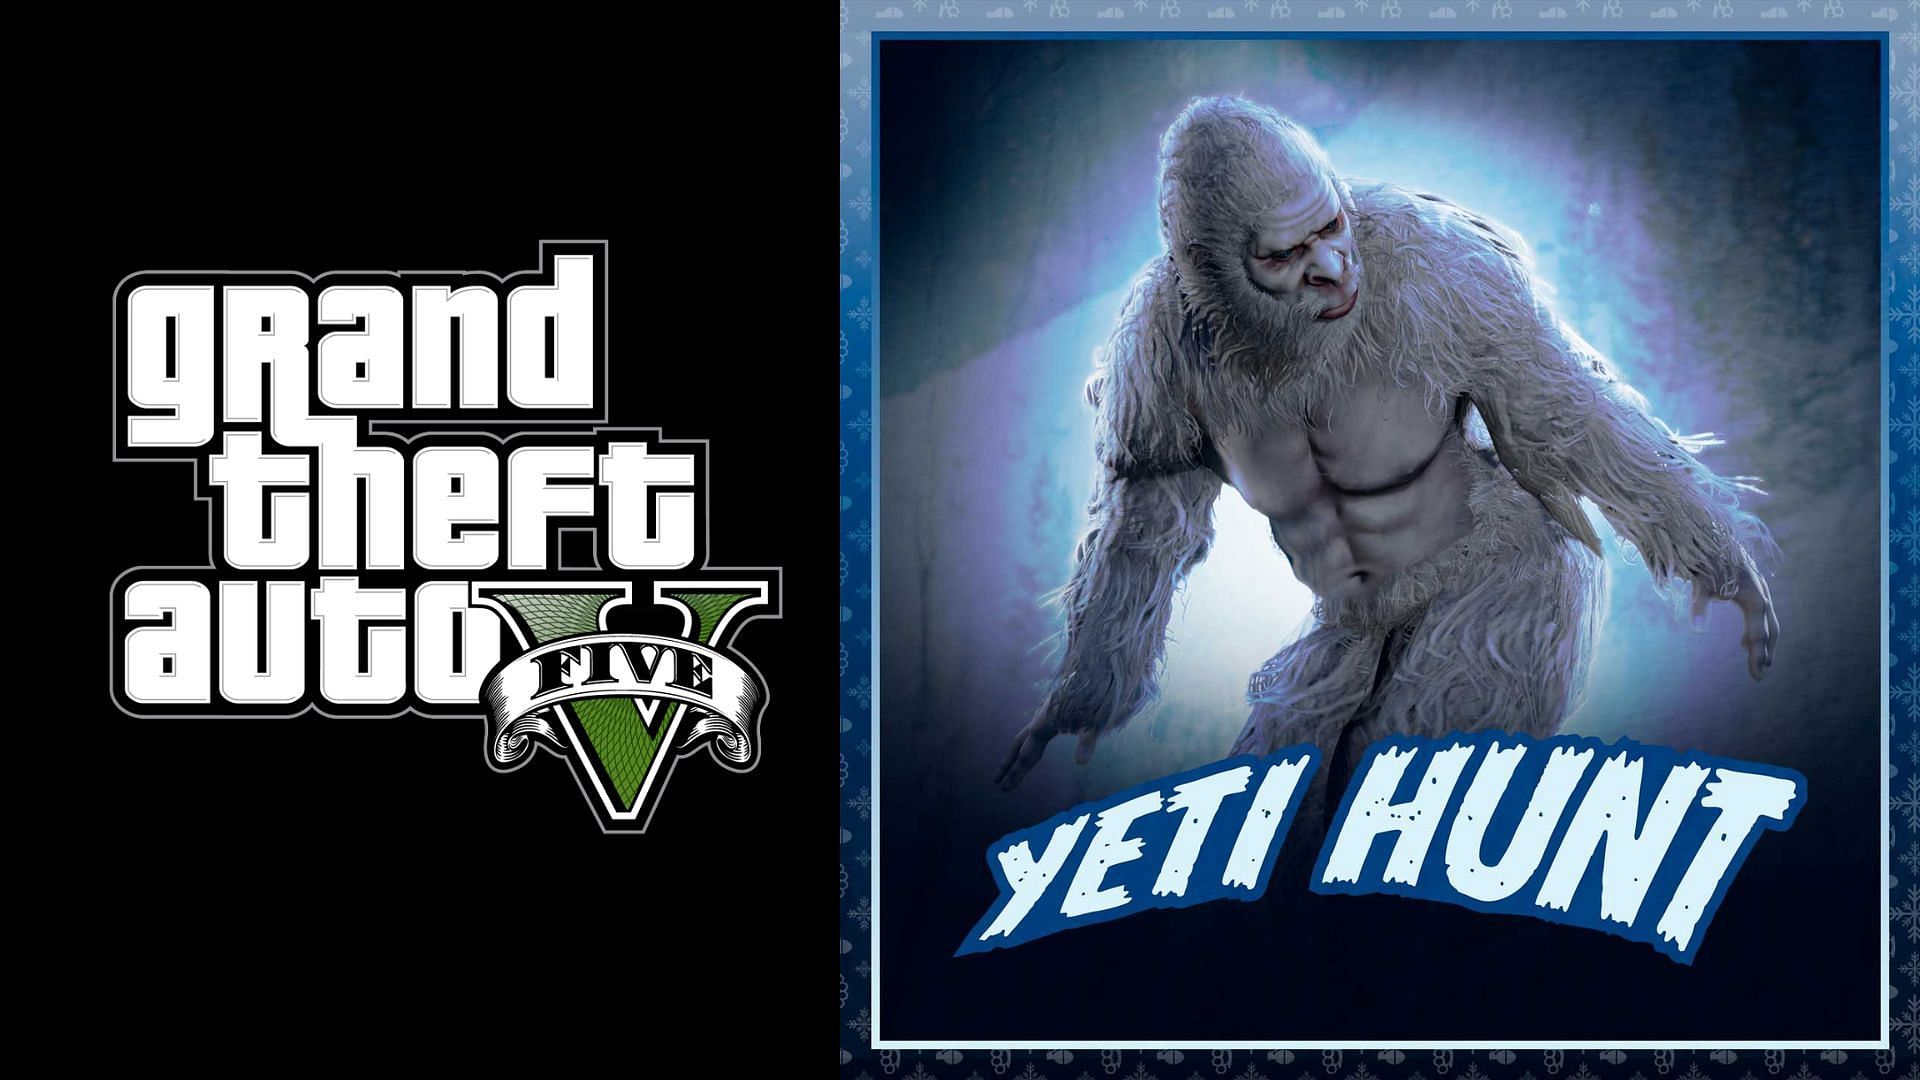 What time does the Yeti spawn in GTA 5 Online